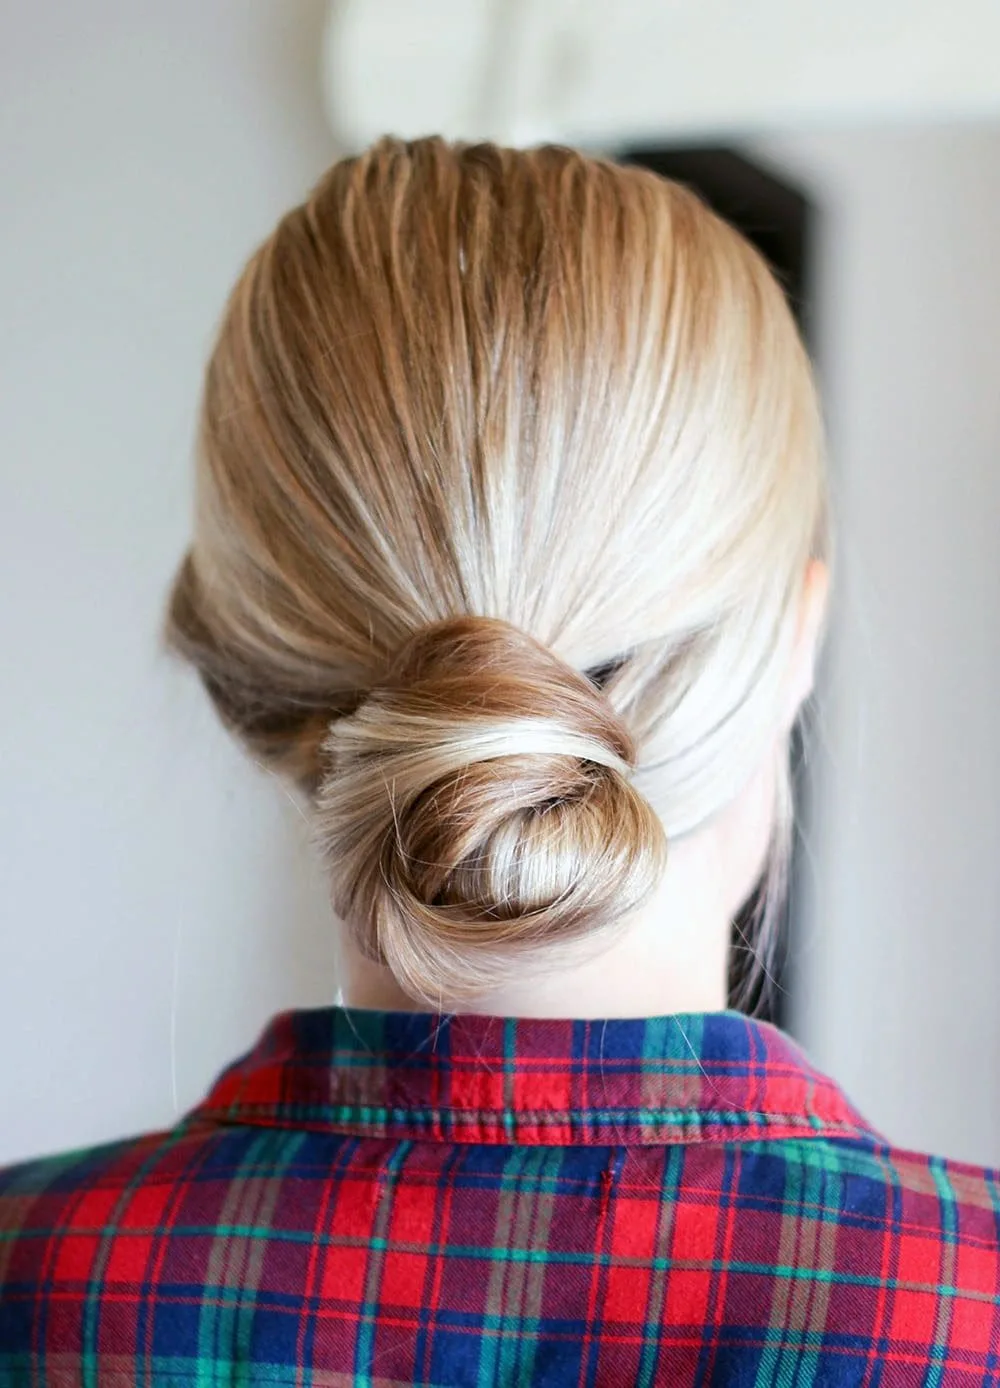 Simply bun with smoothed back hair